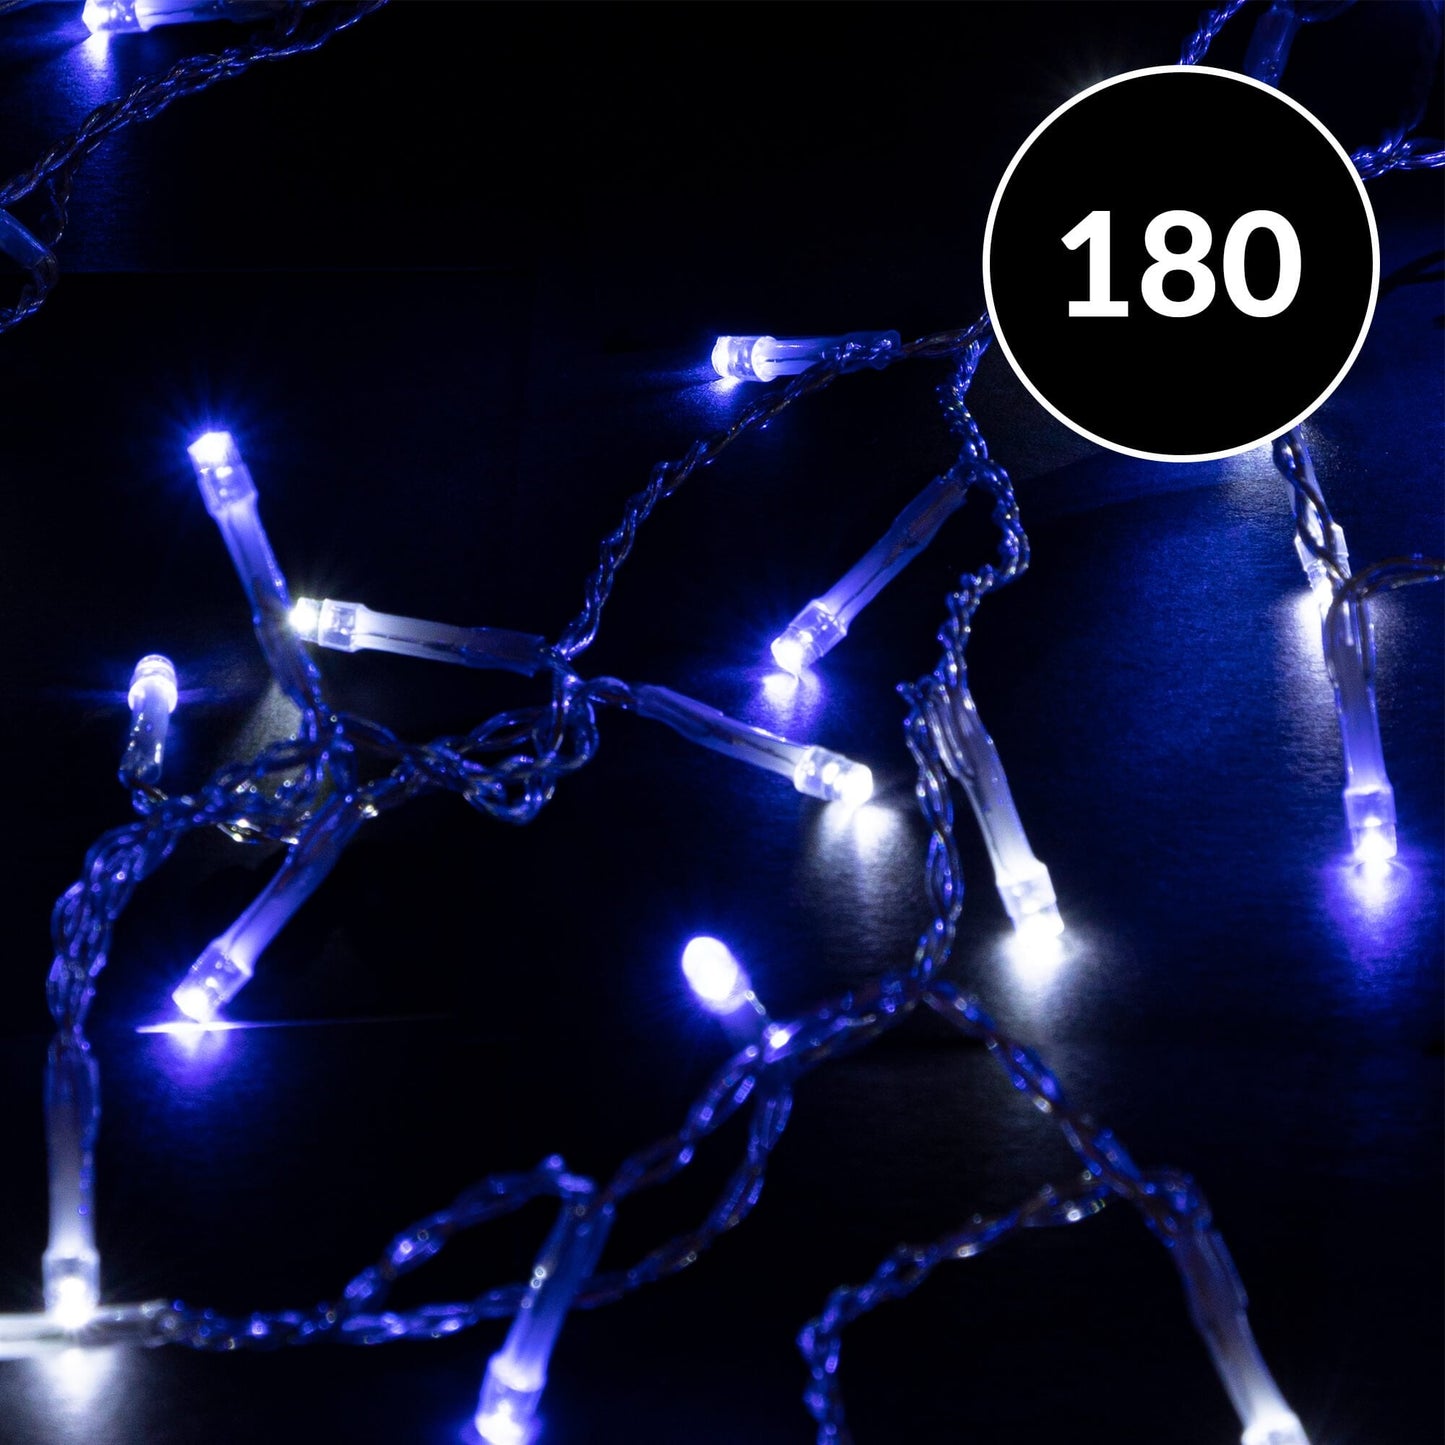 180 Blue & White LED Snowing Icicle Lights